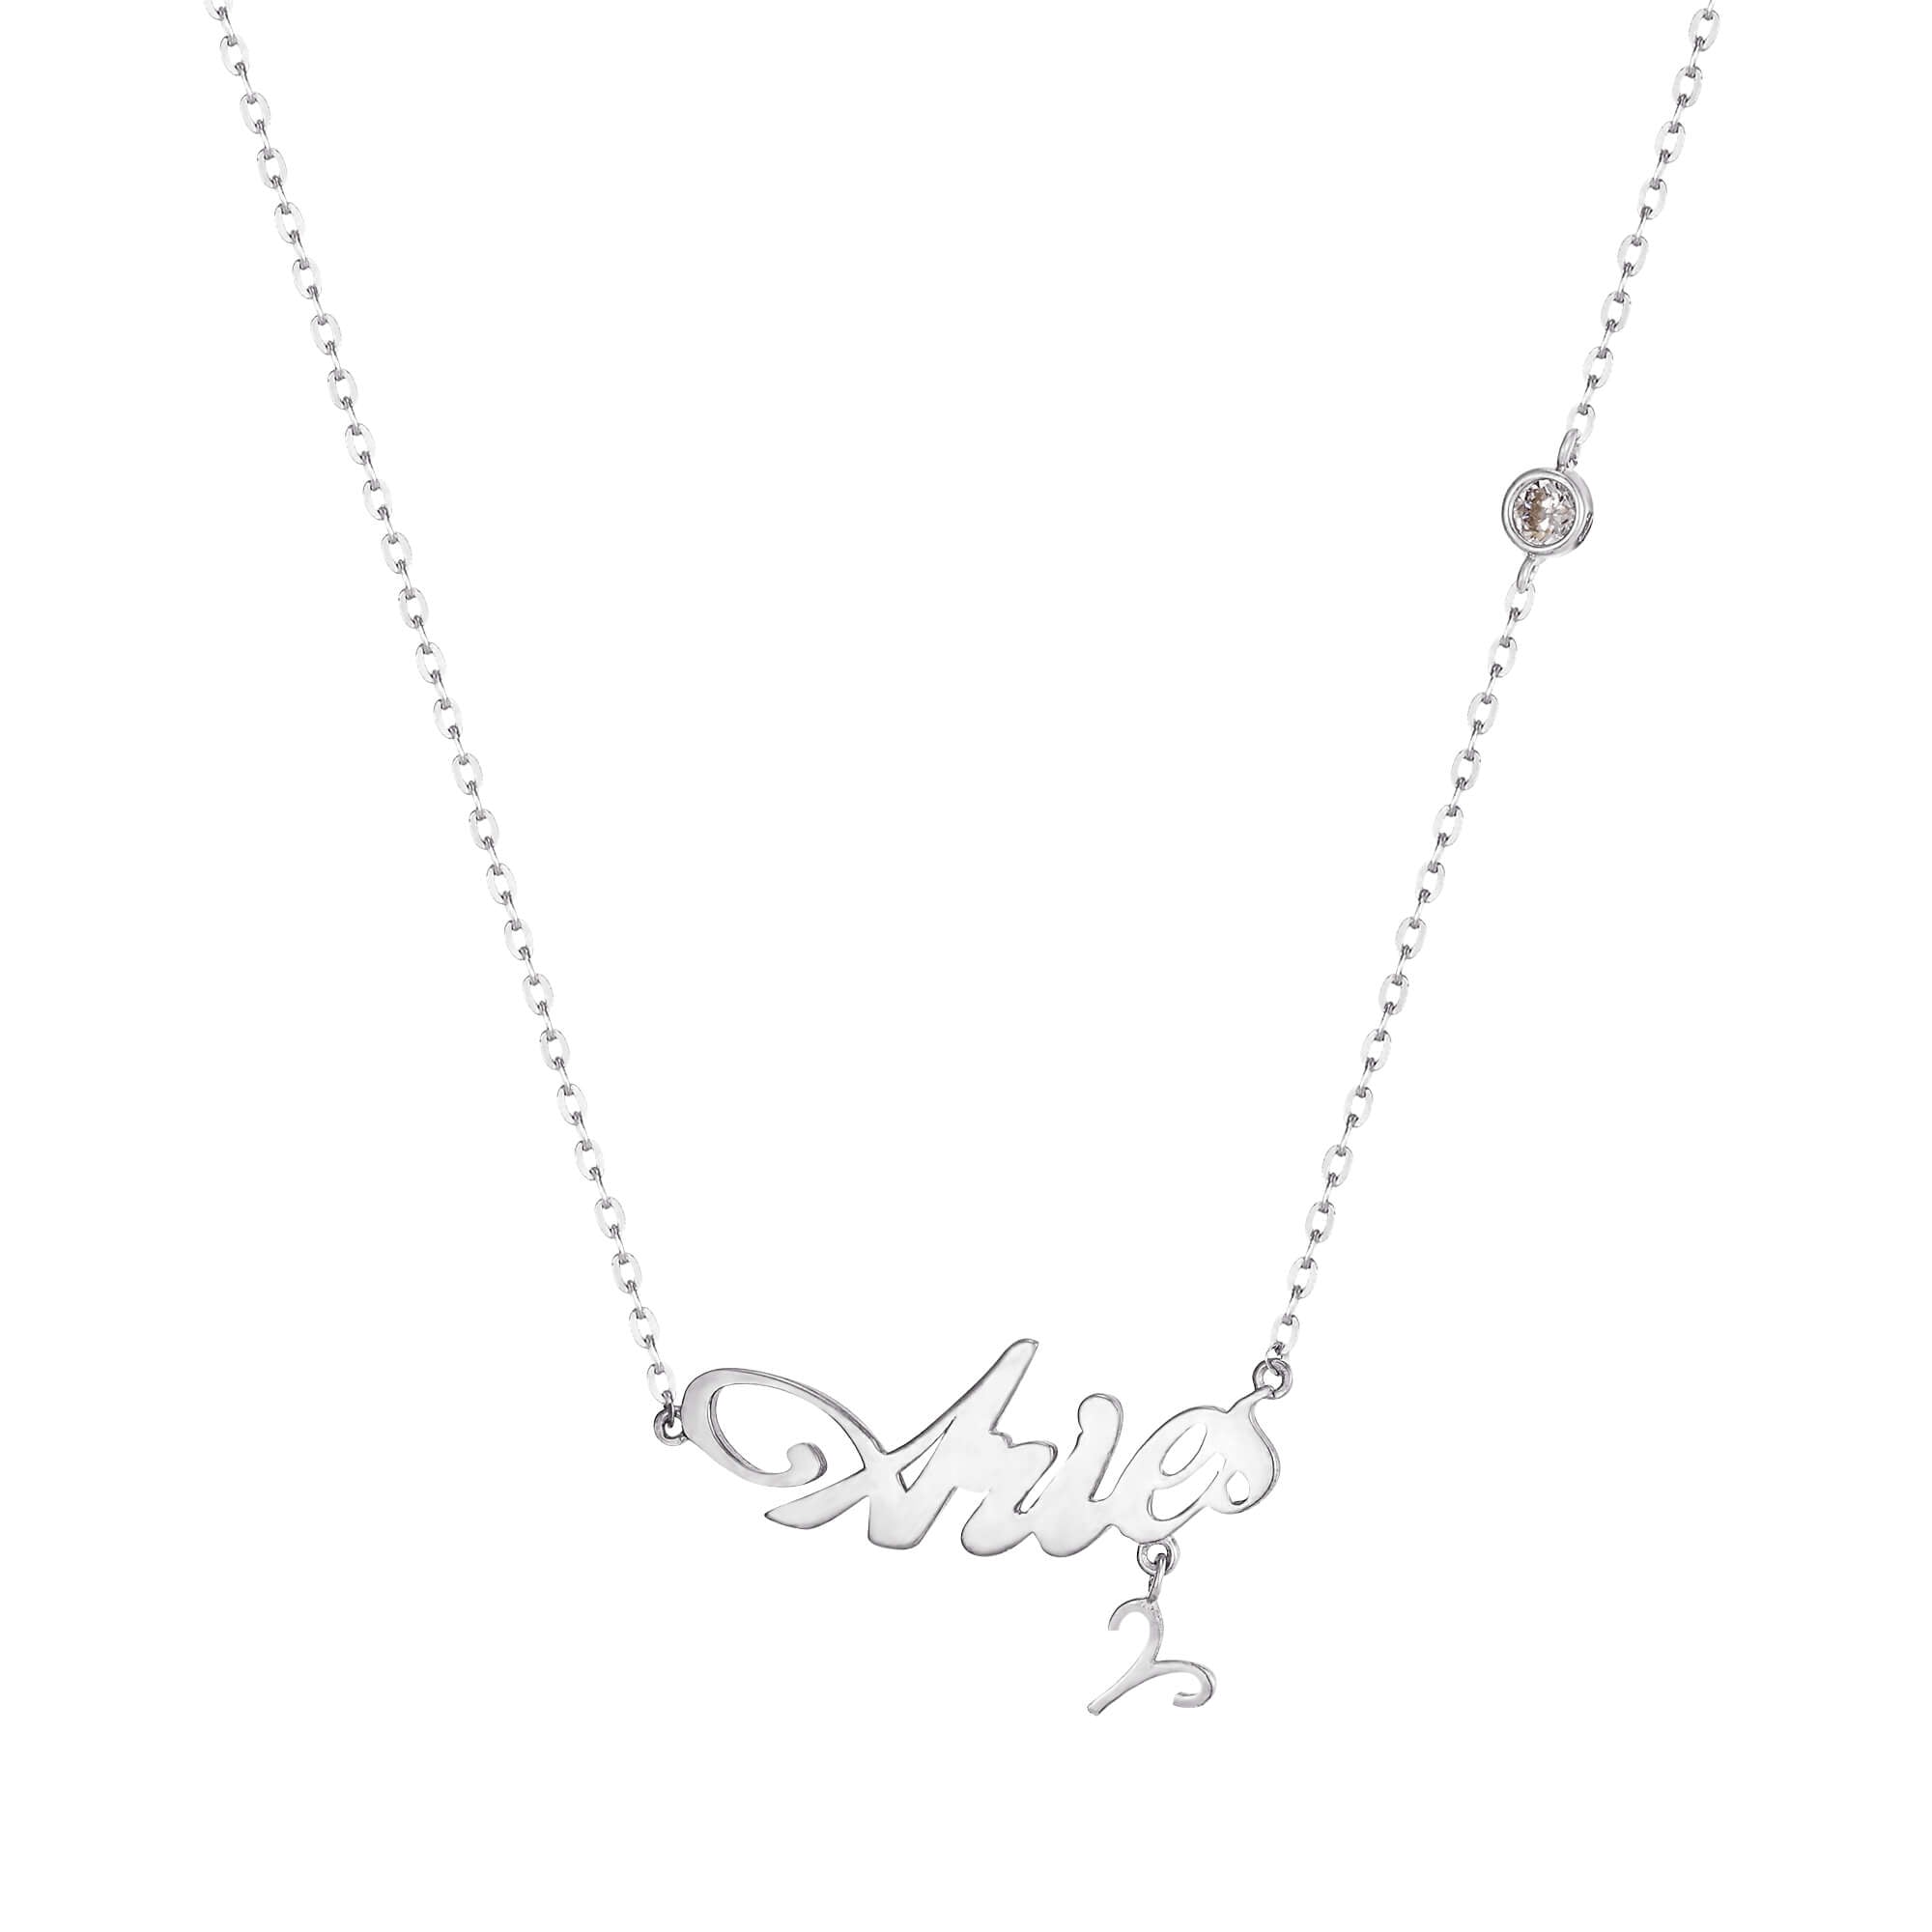 silver Aries necklace - seolgold